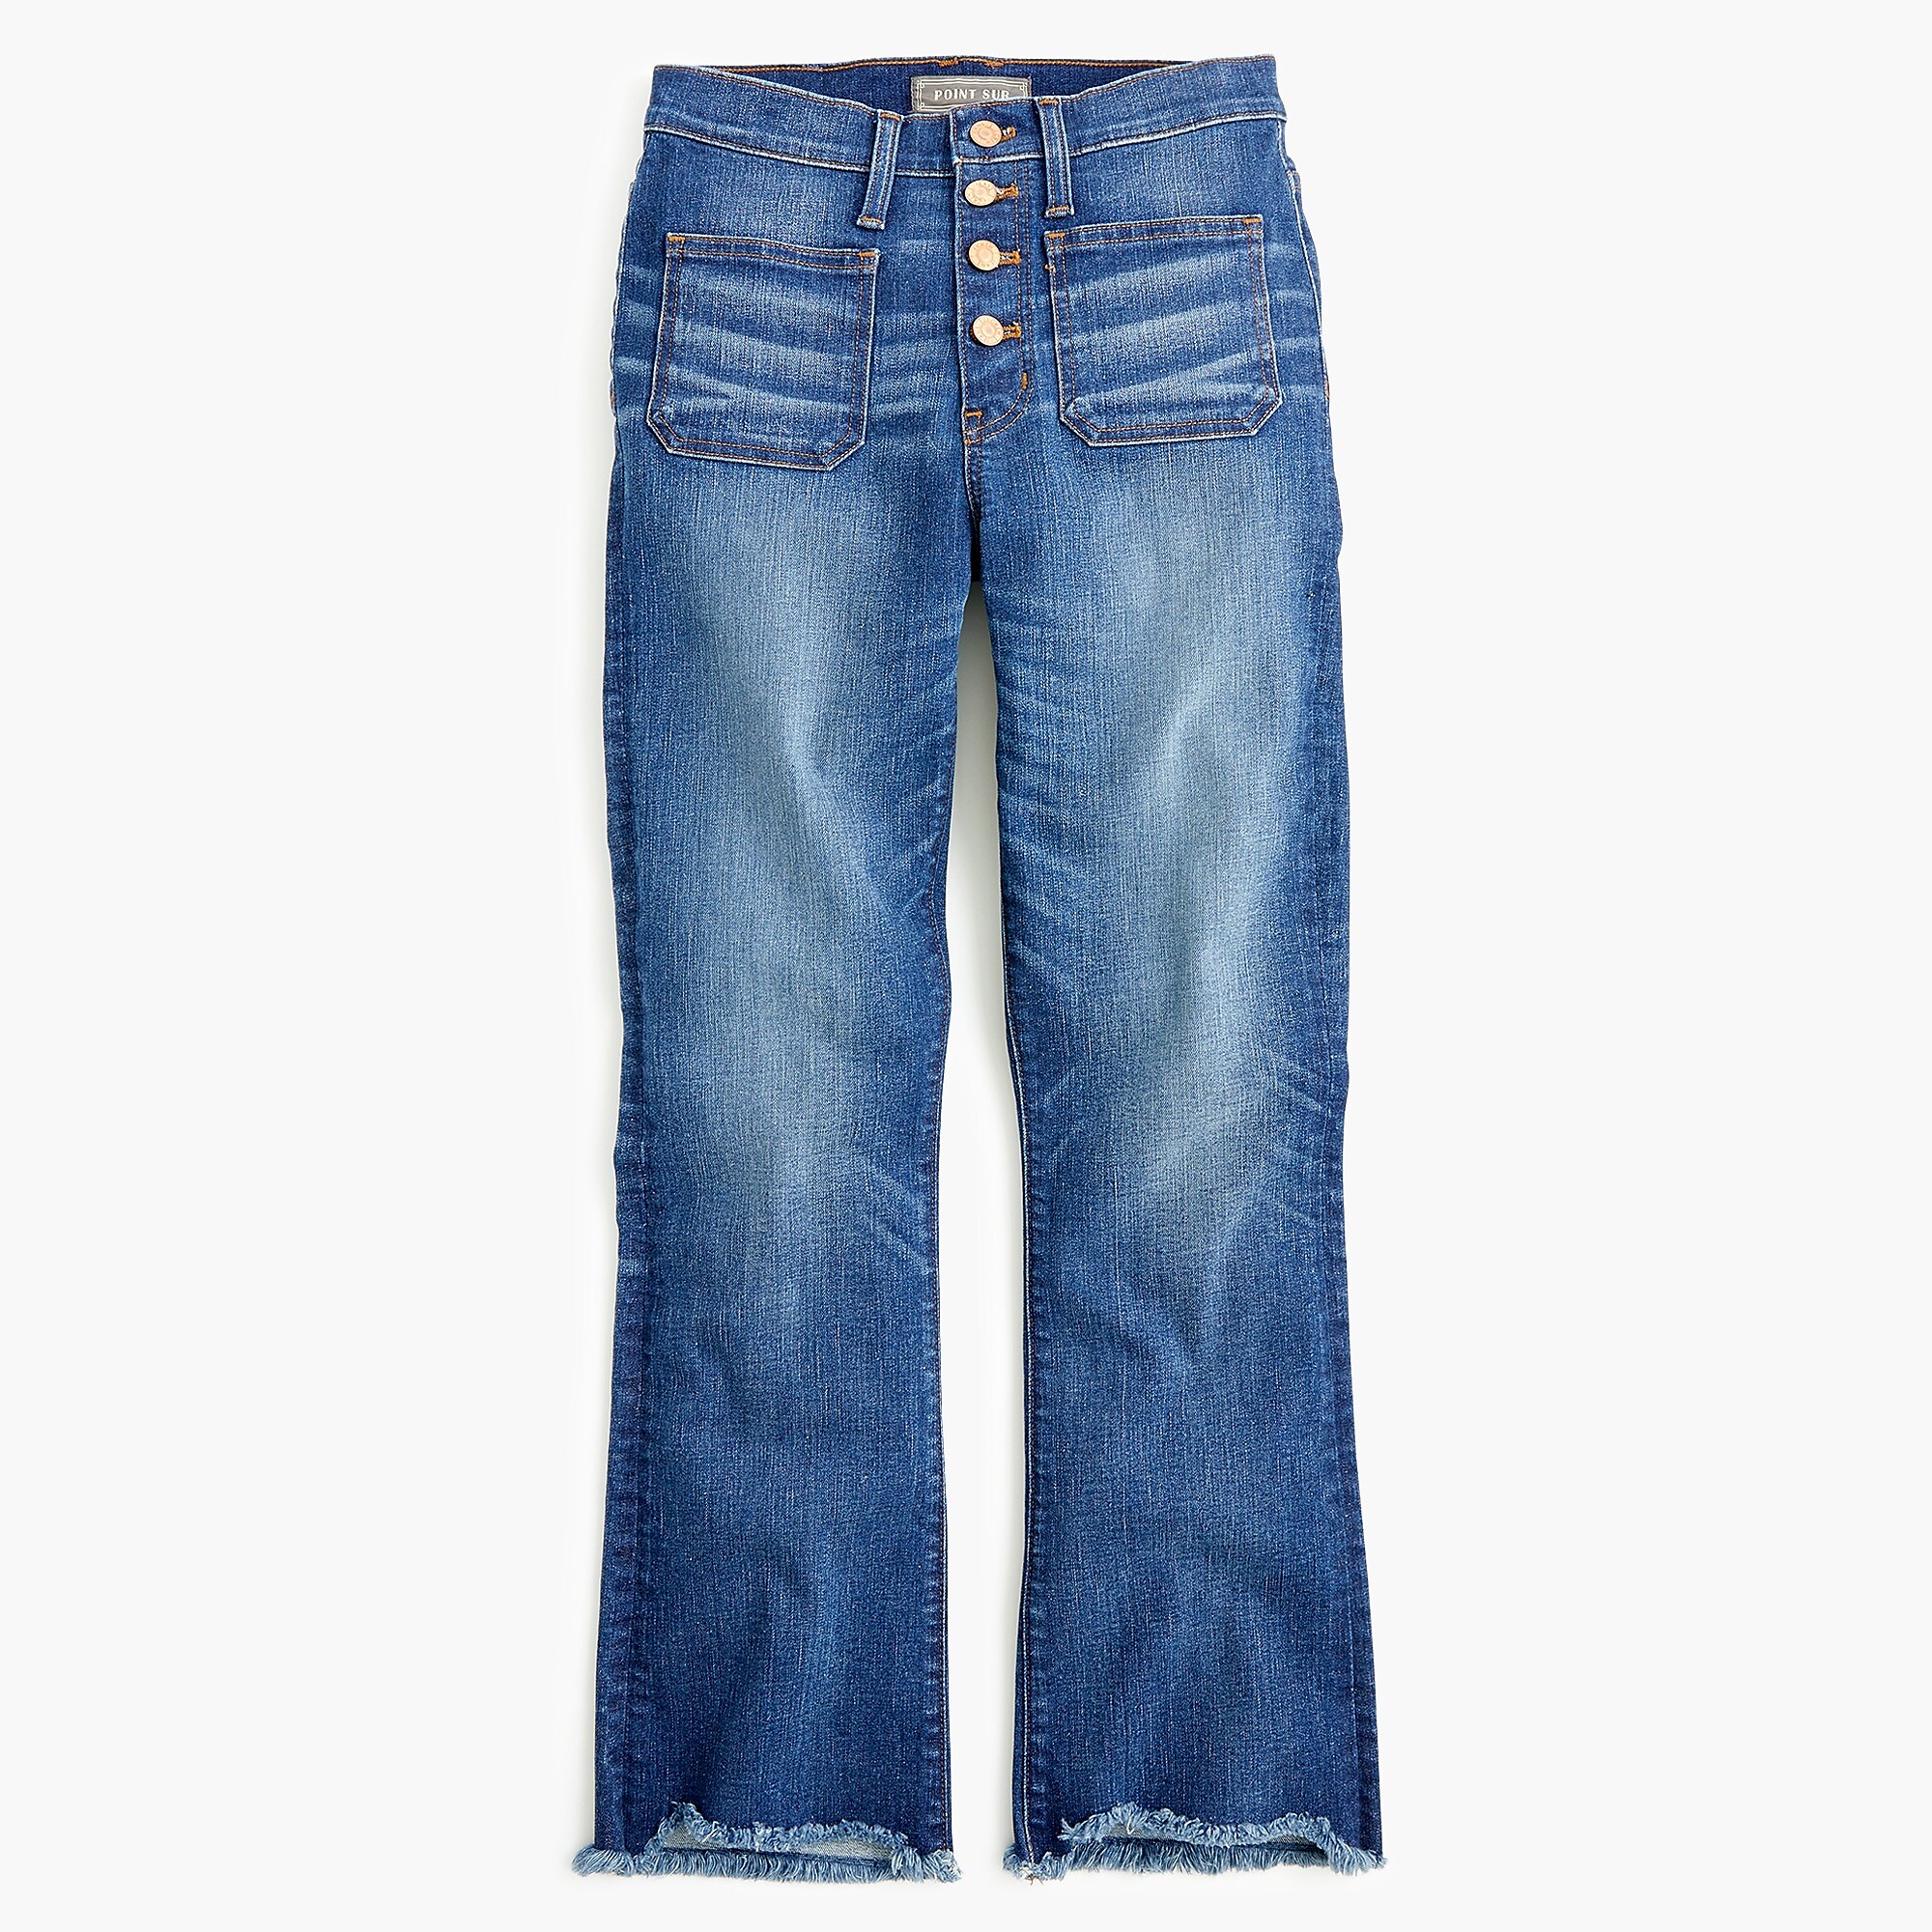 J.Crew: Point Sur 10 High-rise Demi-boot Jean With Button Fly For Women